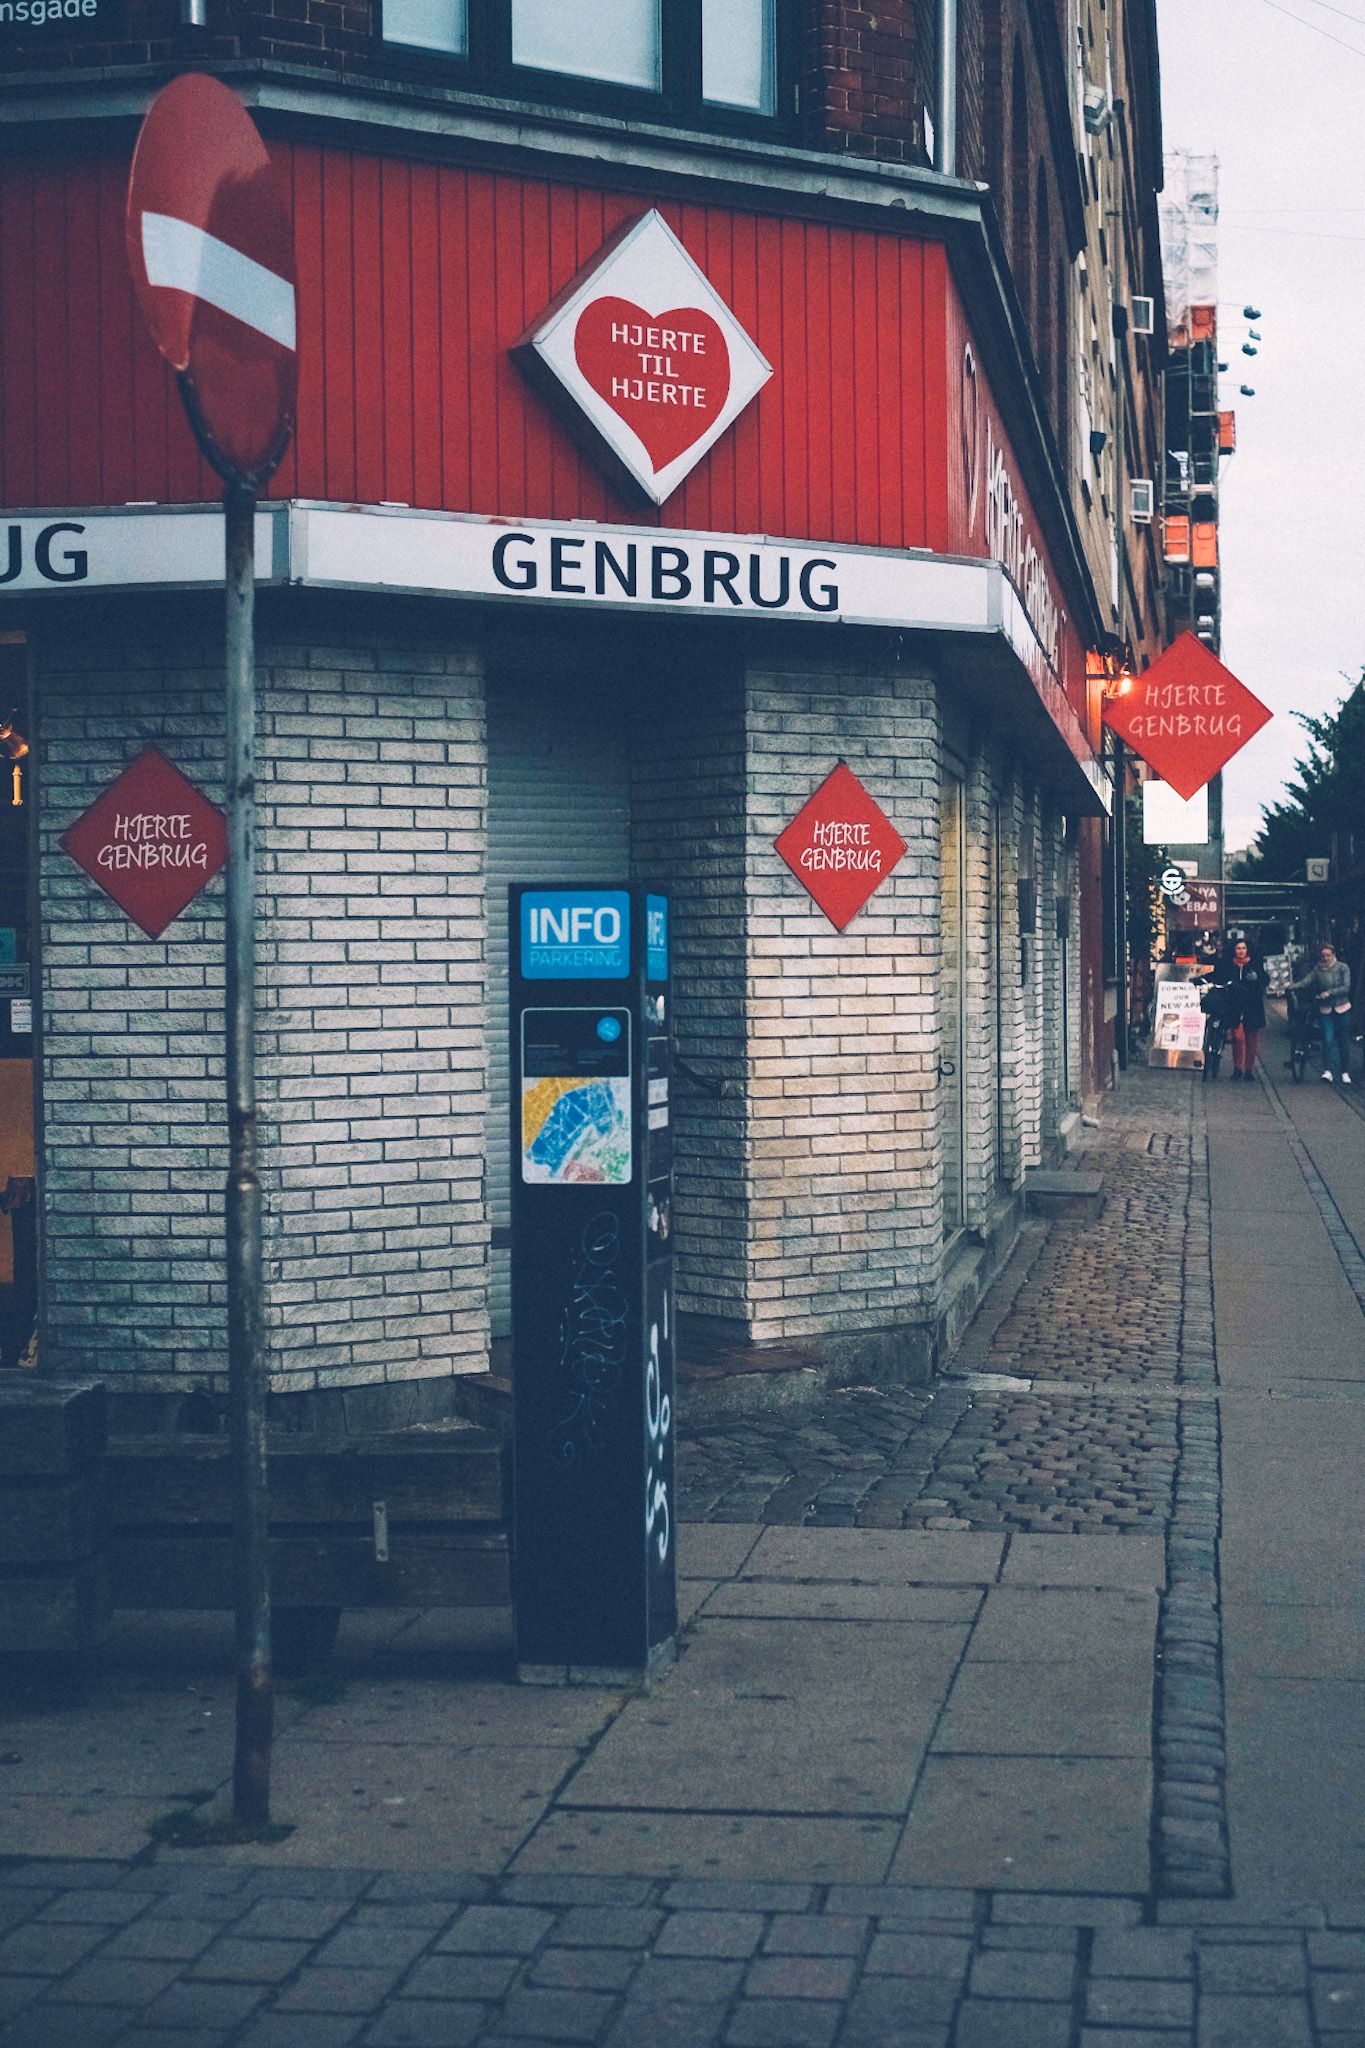 On a street corner of Copenhagen, a corner store with red branding has white letters displaying “Genbrug”.